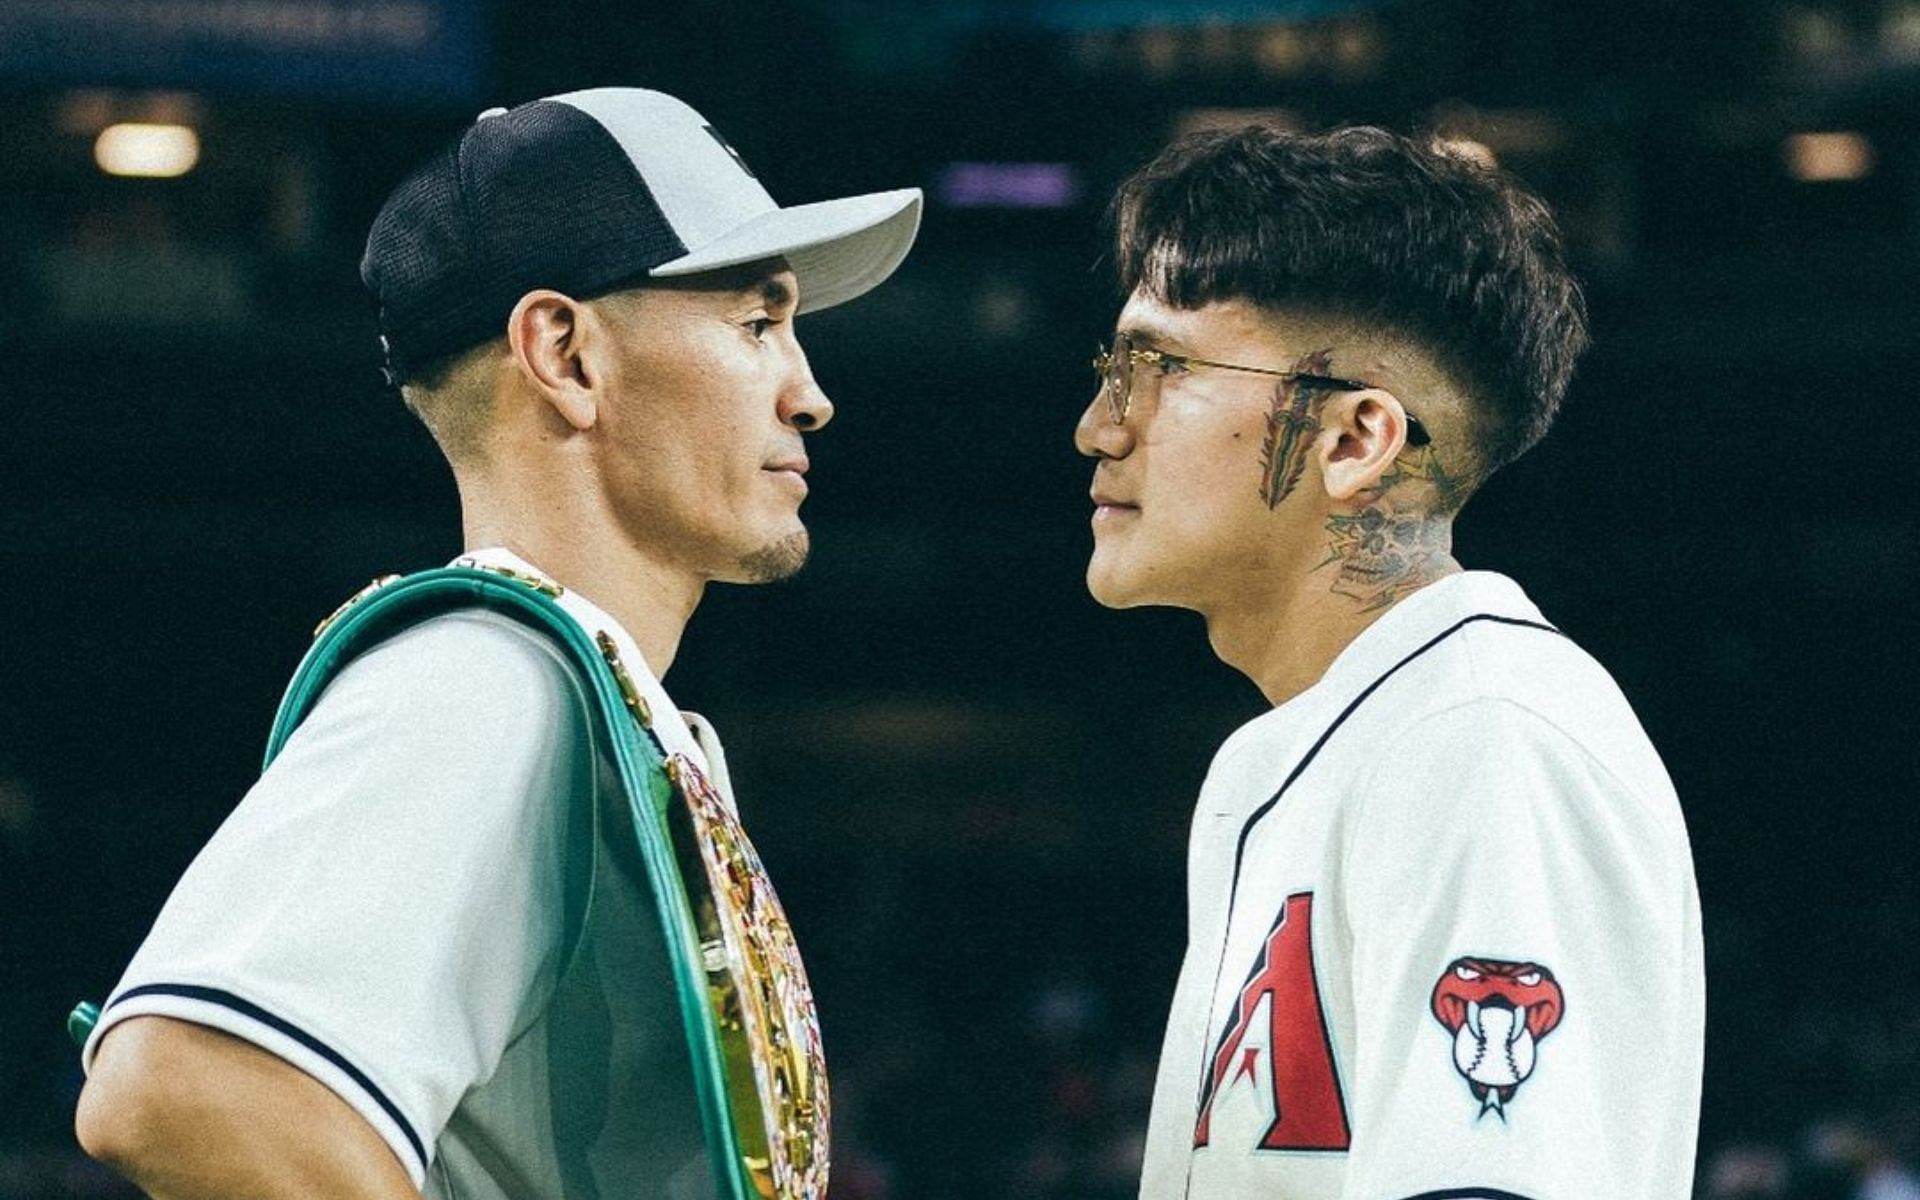 Juan Francisco Estrada (left) will defend his WBC super flyweight title against Jesse Rodriguez (right) later tonight at the Footprint Center in Phoenix, Florida [Image courtesy @matchroomboxing on Instagram]